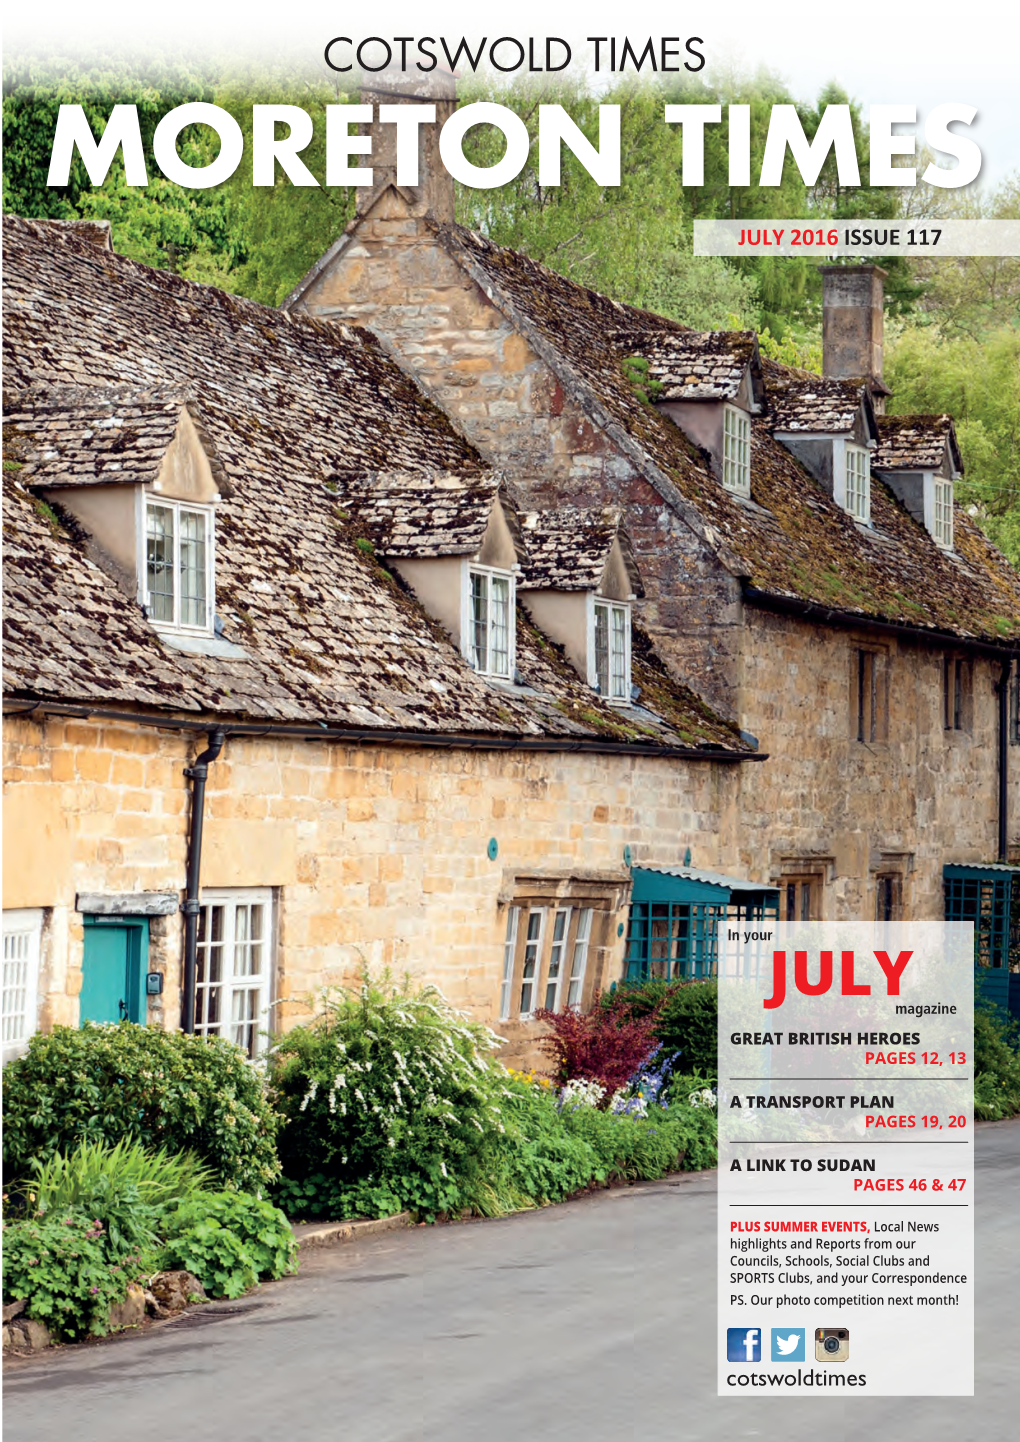 Moreton Timestimes July 2016 Issue 117 July 2016 Issue 117